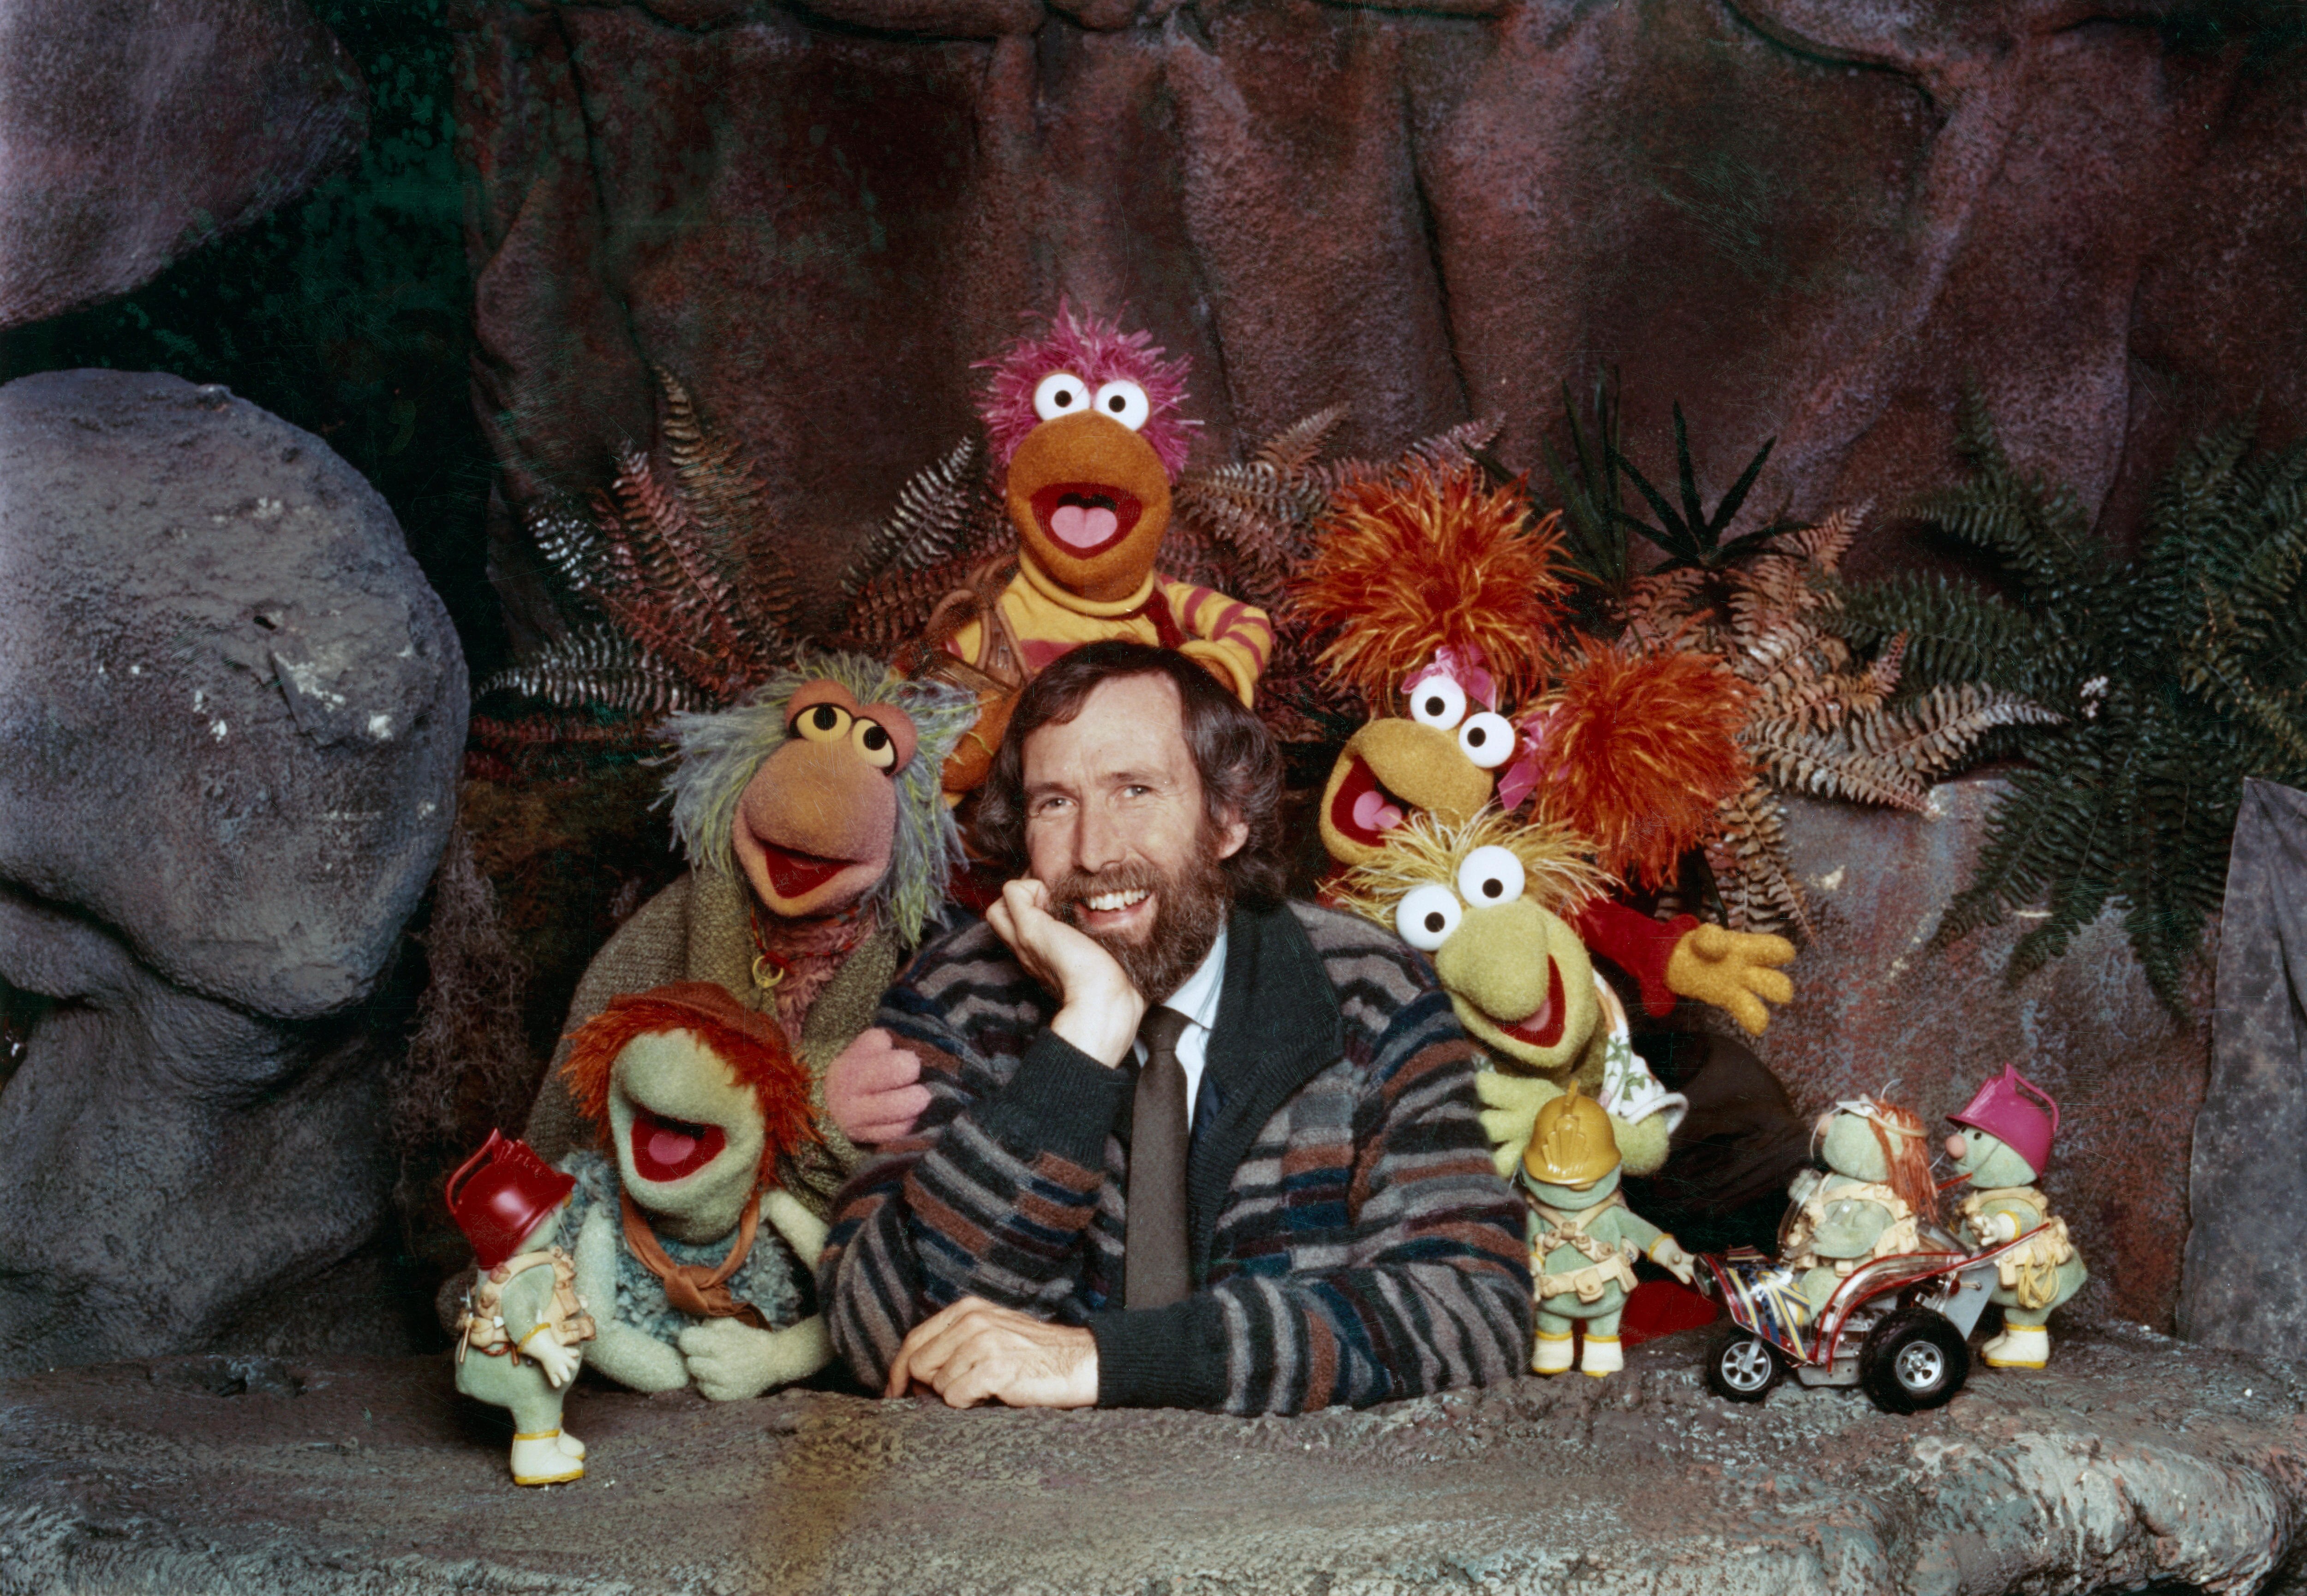 A documentary homage to Jim Henson